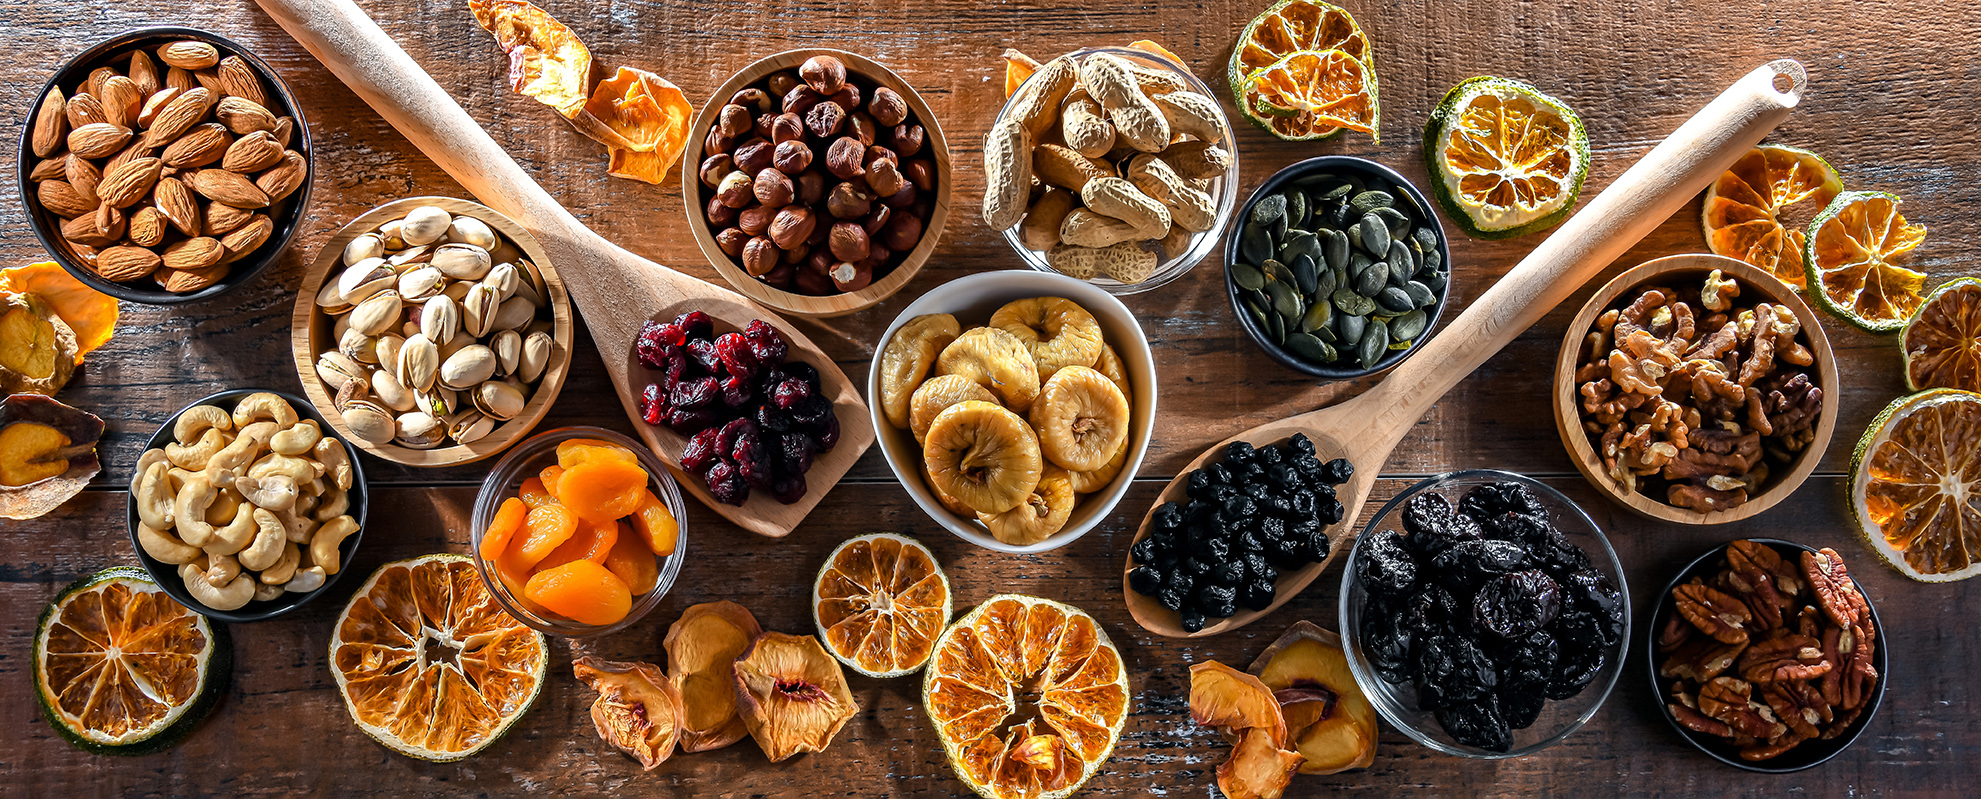  "A panoramic view of various dried fruits and nuts displayed on a wooden surface. The assortment includes almonds, pistachios, hazelnuts, peanuts, pumpkin seeds, cashews, dried cranberries, dried figs, dried apricots, black raisins, and walnuts, along with dried slices of orange. Rolling pins and scattered dried orange slices add to the rustic presentation."